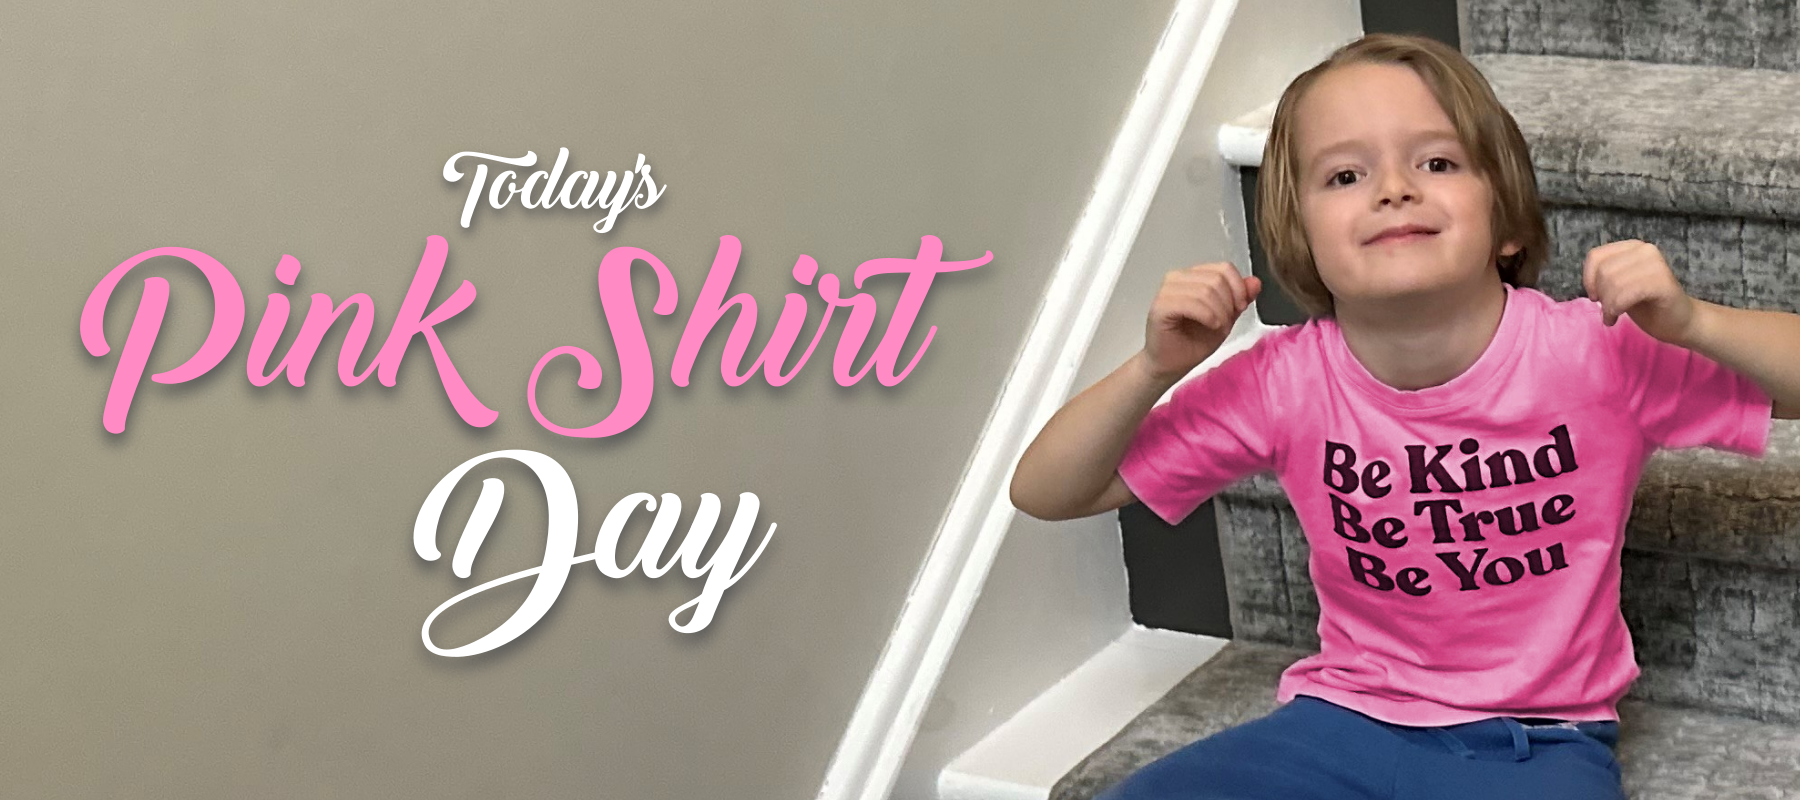 Today is Pink Shirt Day!